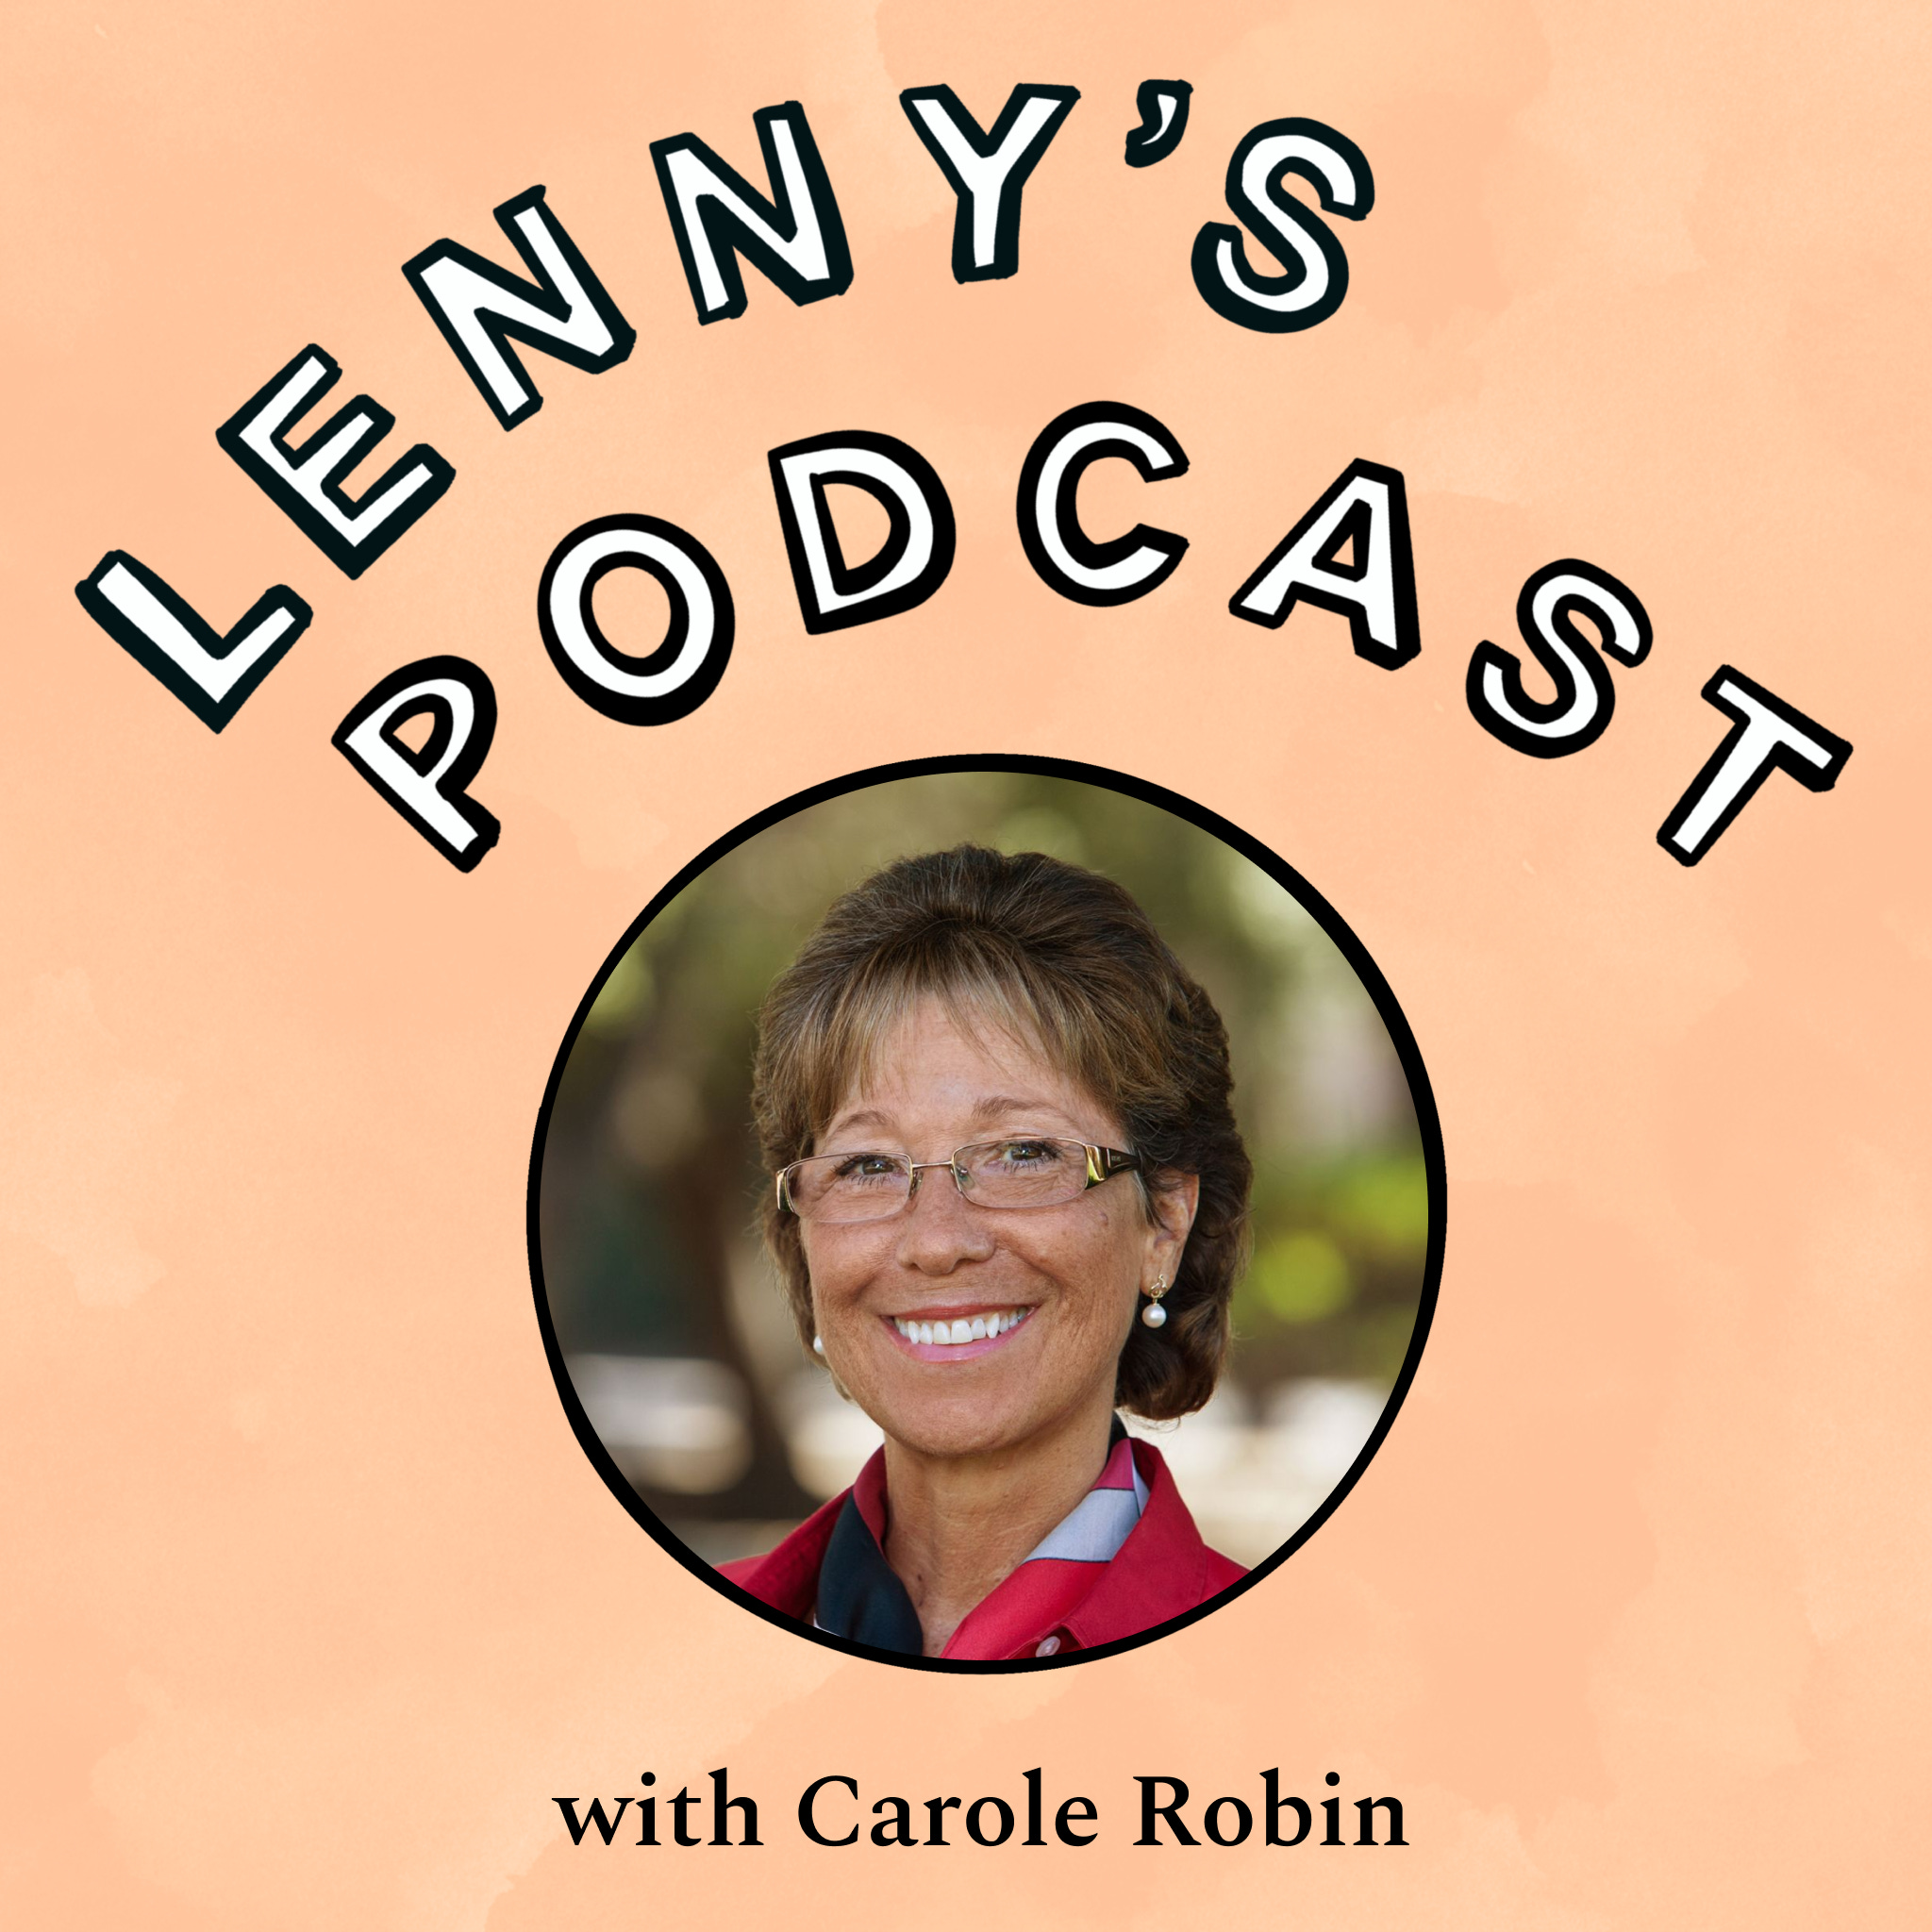 How to build deeper, more robust relationships | Carole Robin (Stanford GSB professor, “Touchy Feely”)